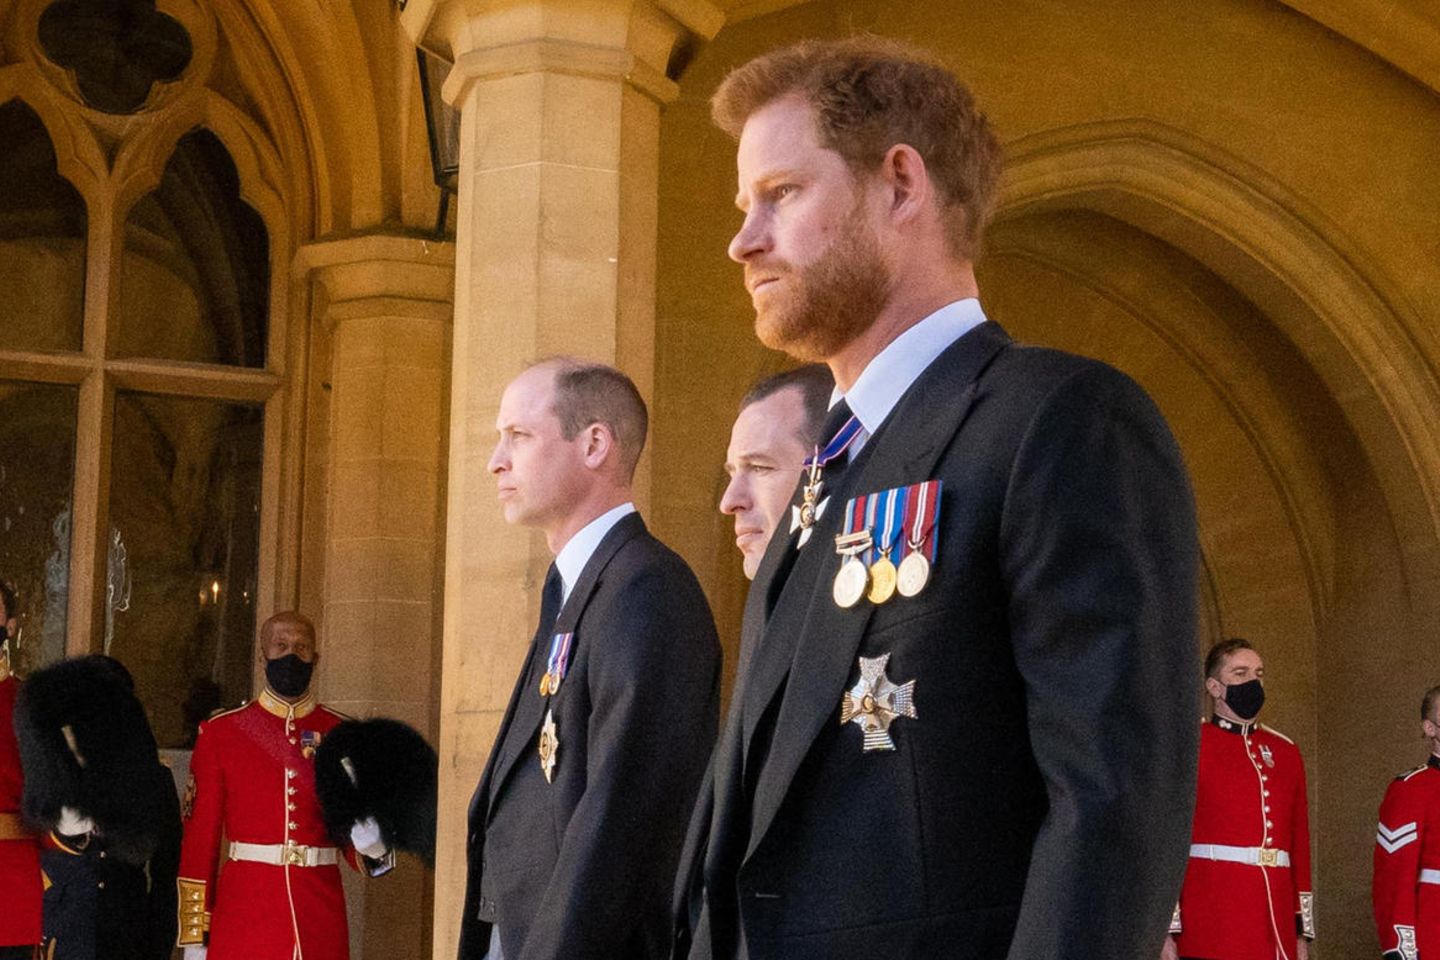 Prince Harry and Prince William next to Peter Phillips at the funeral service of Prince Philip (on 99) on 17 April 2021